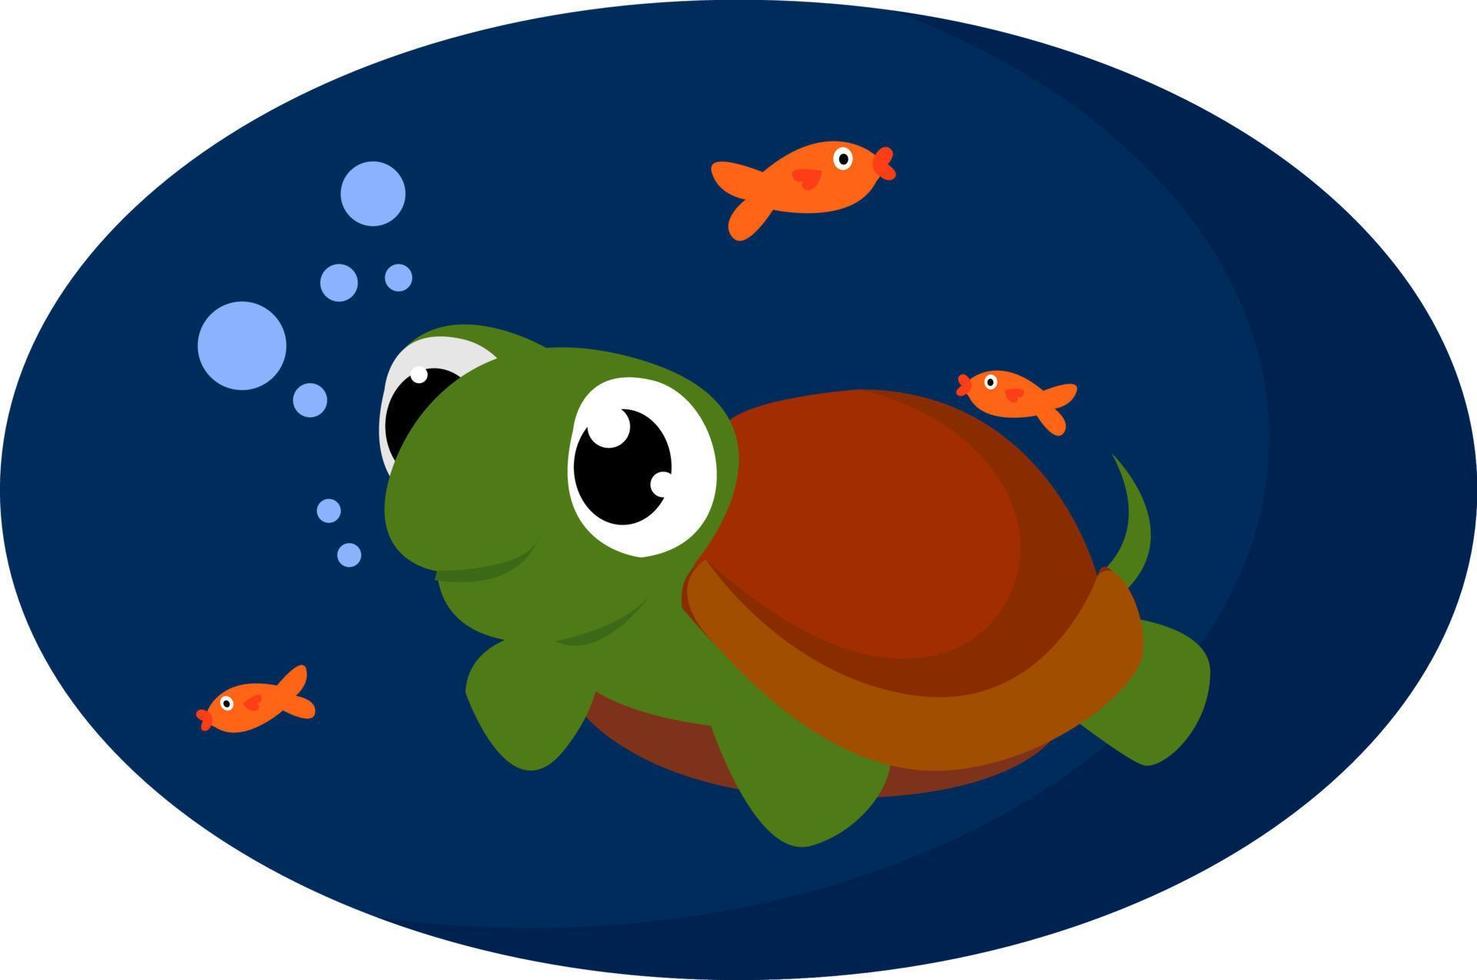 Cute turtle, illustration, vector on white background.